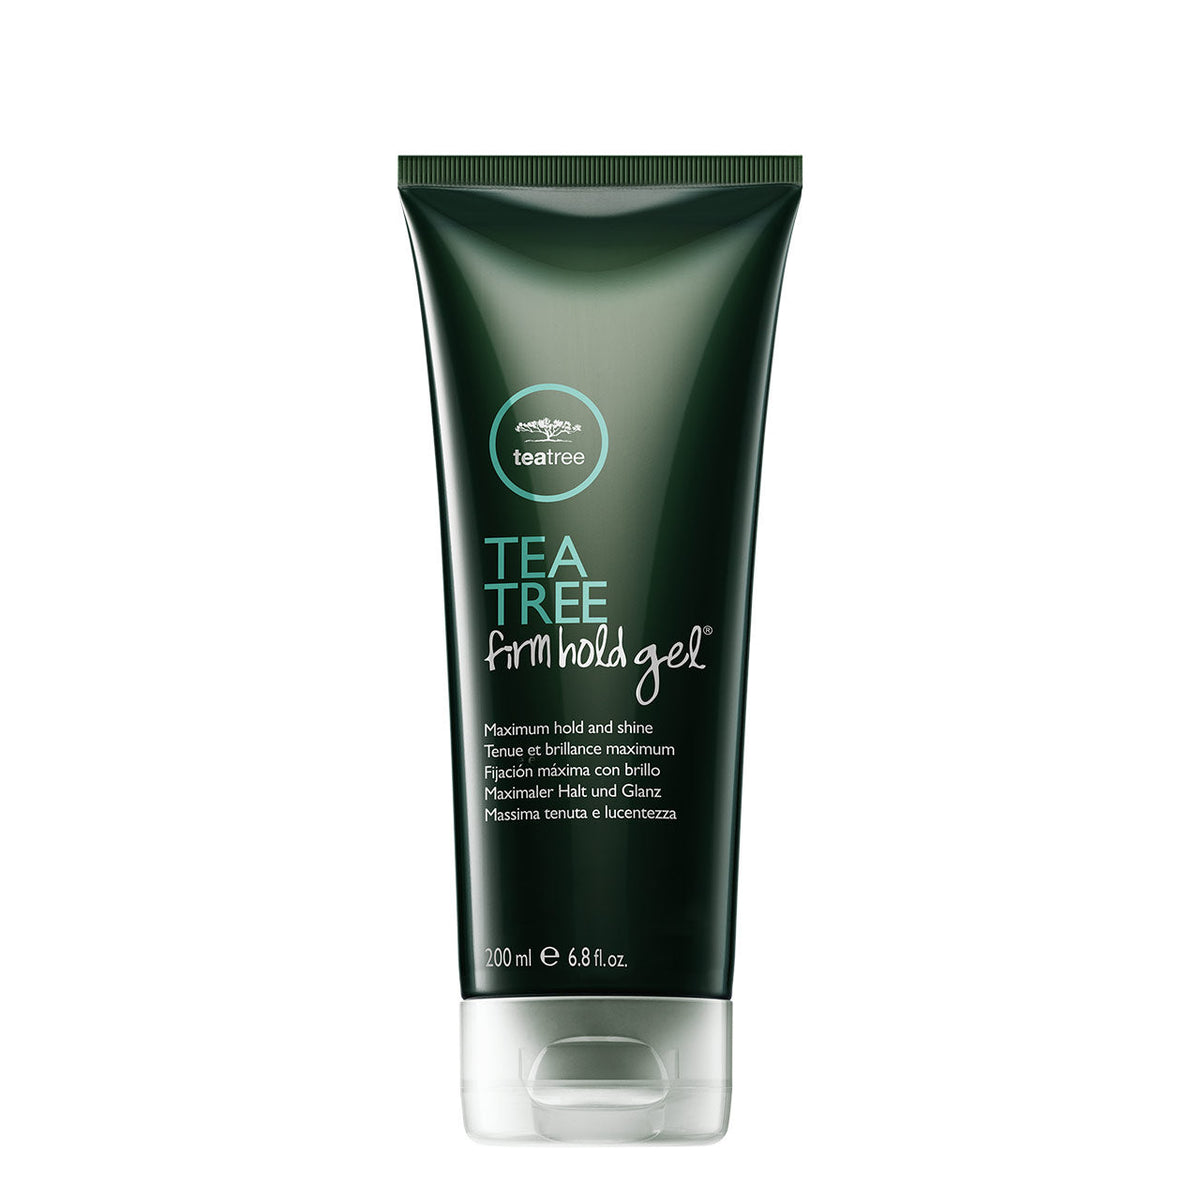 Tea Tree Firm Hold Gel - 200ML - by Paul Mitchell |ProCare Outlet|